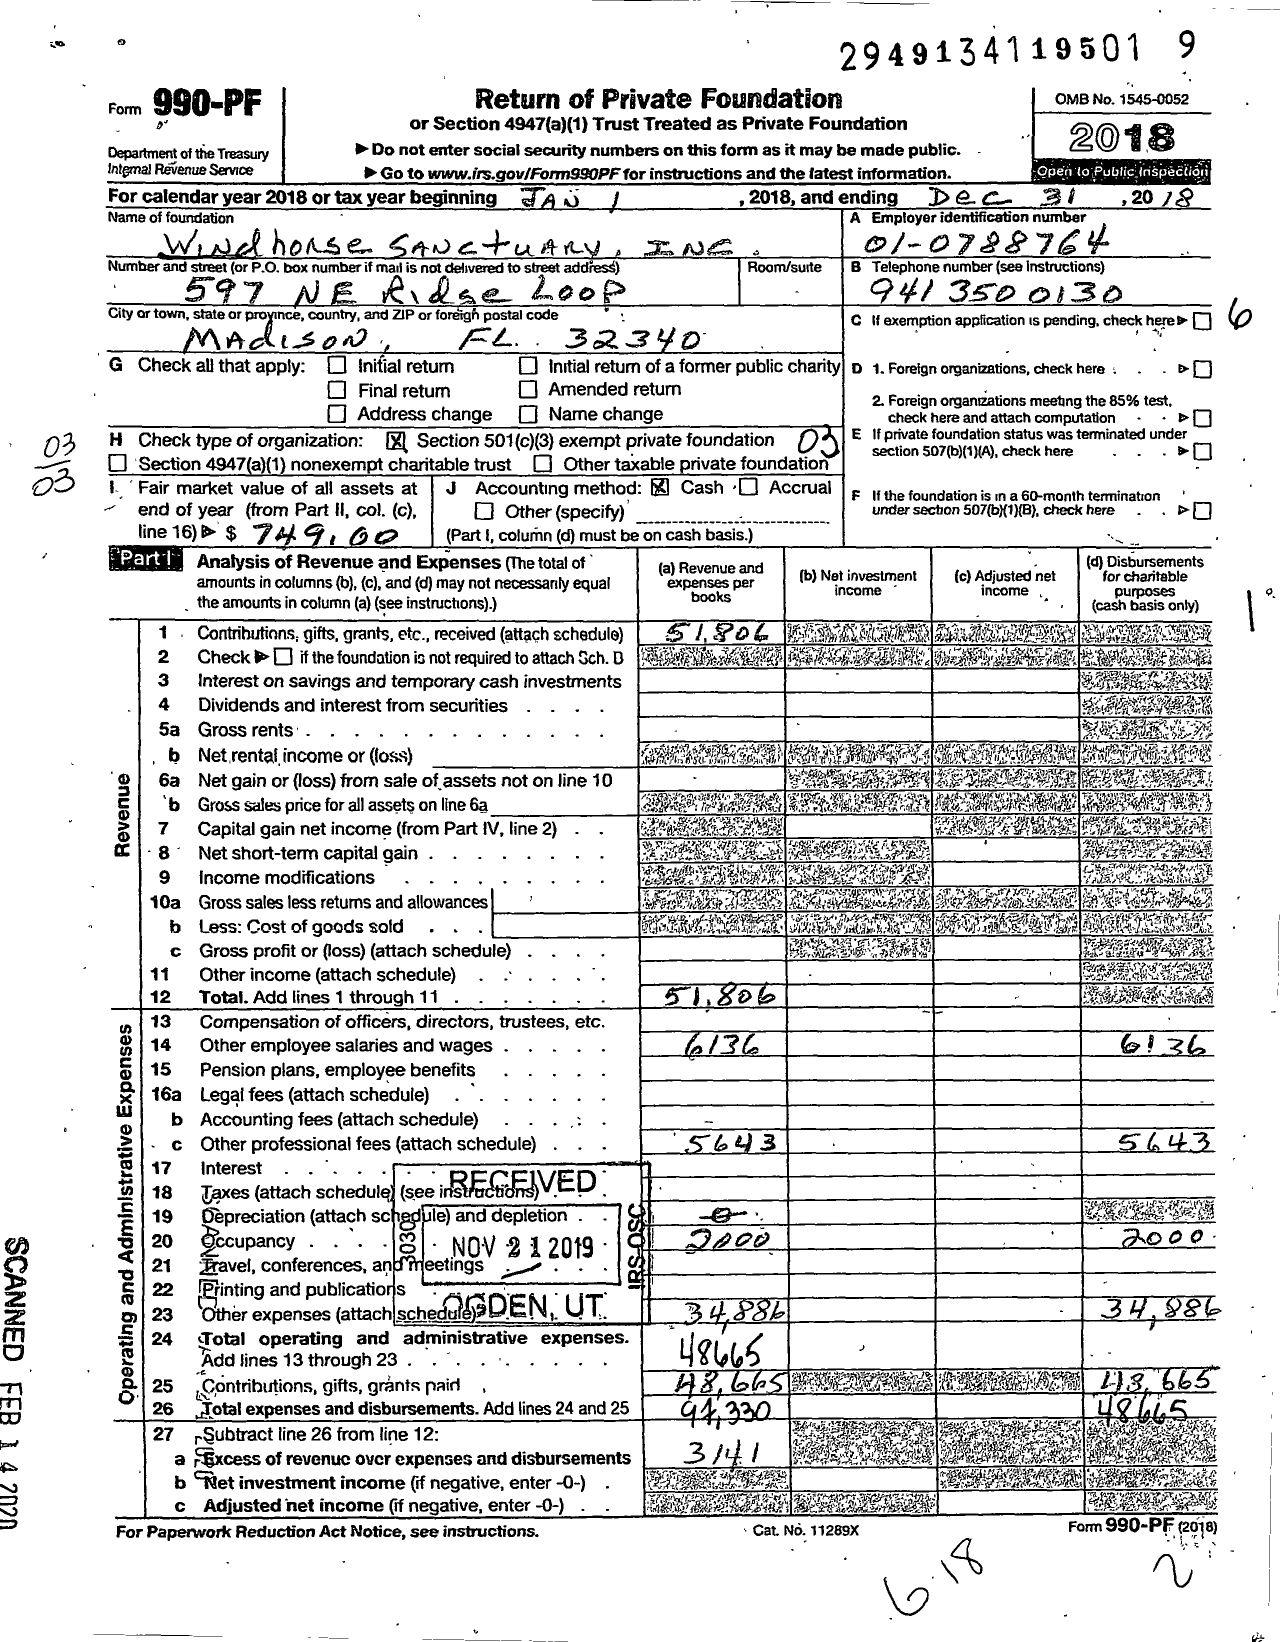 Image of first page of 2018 Form 990PF for Windhorse Sanctuary